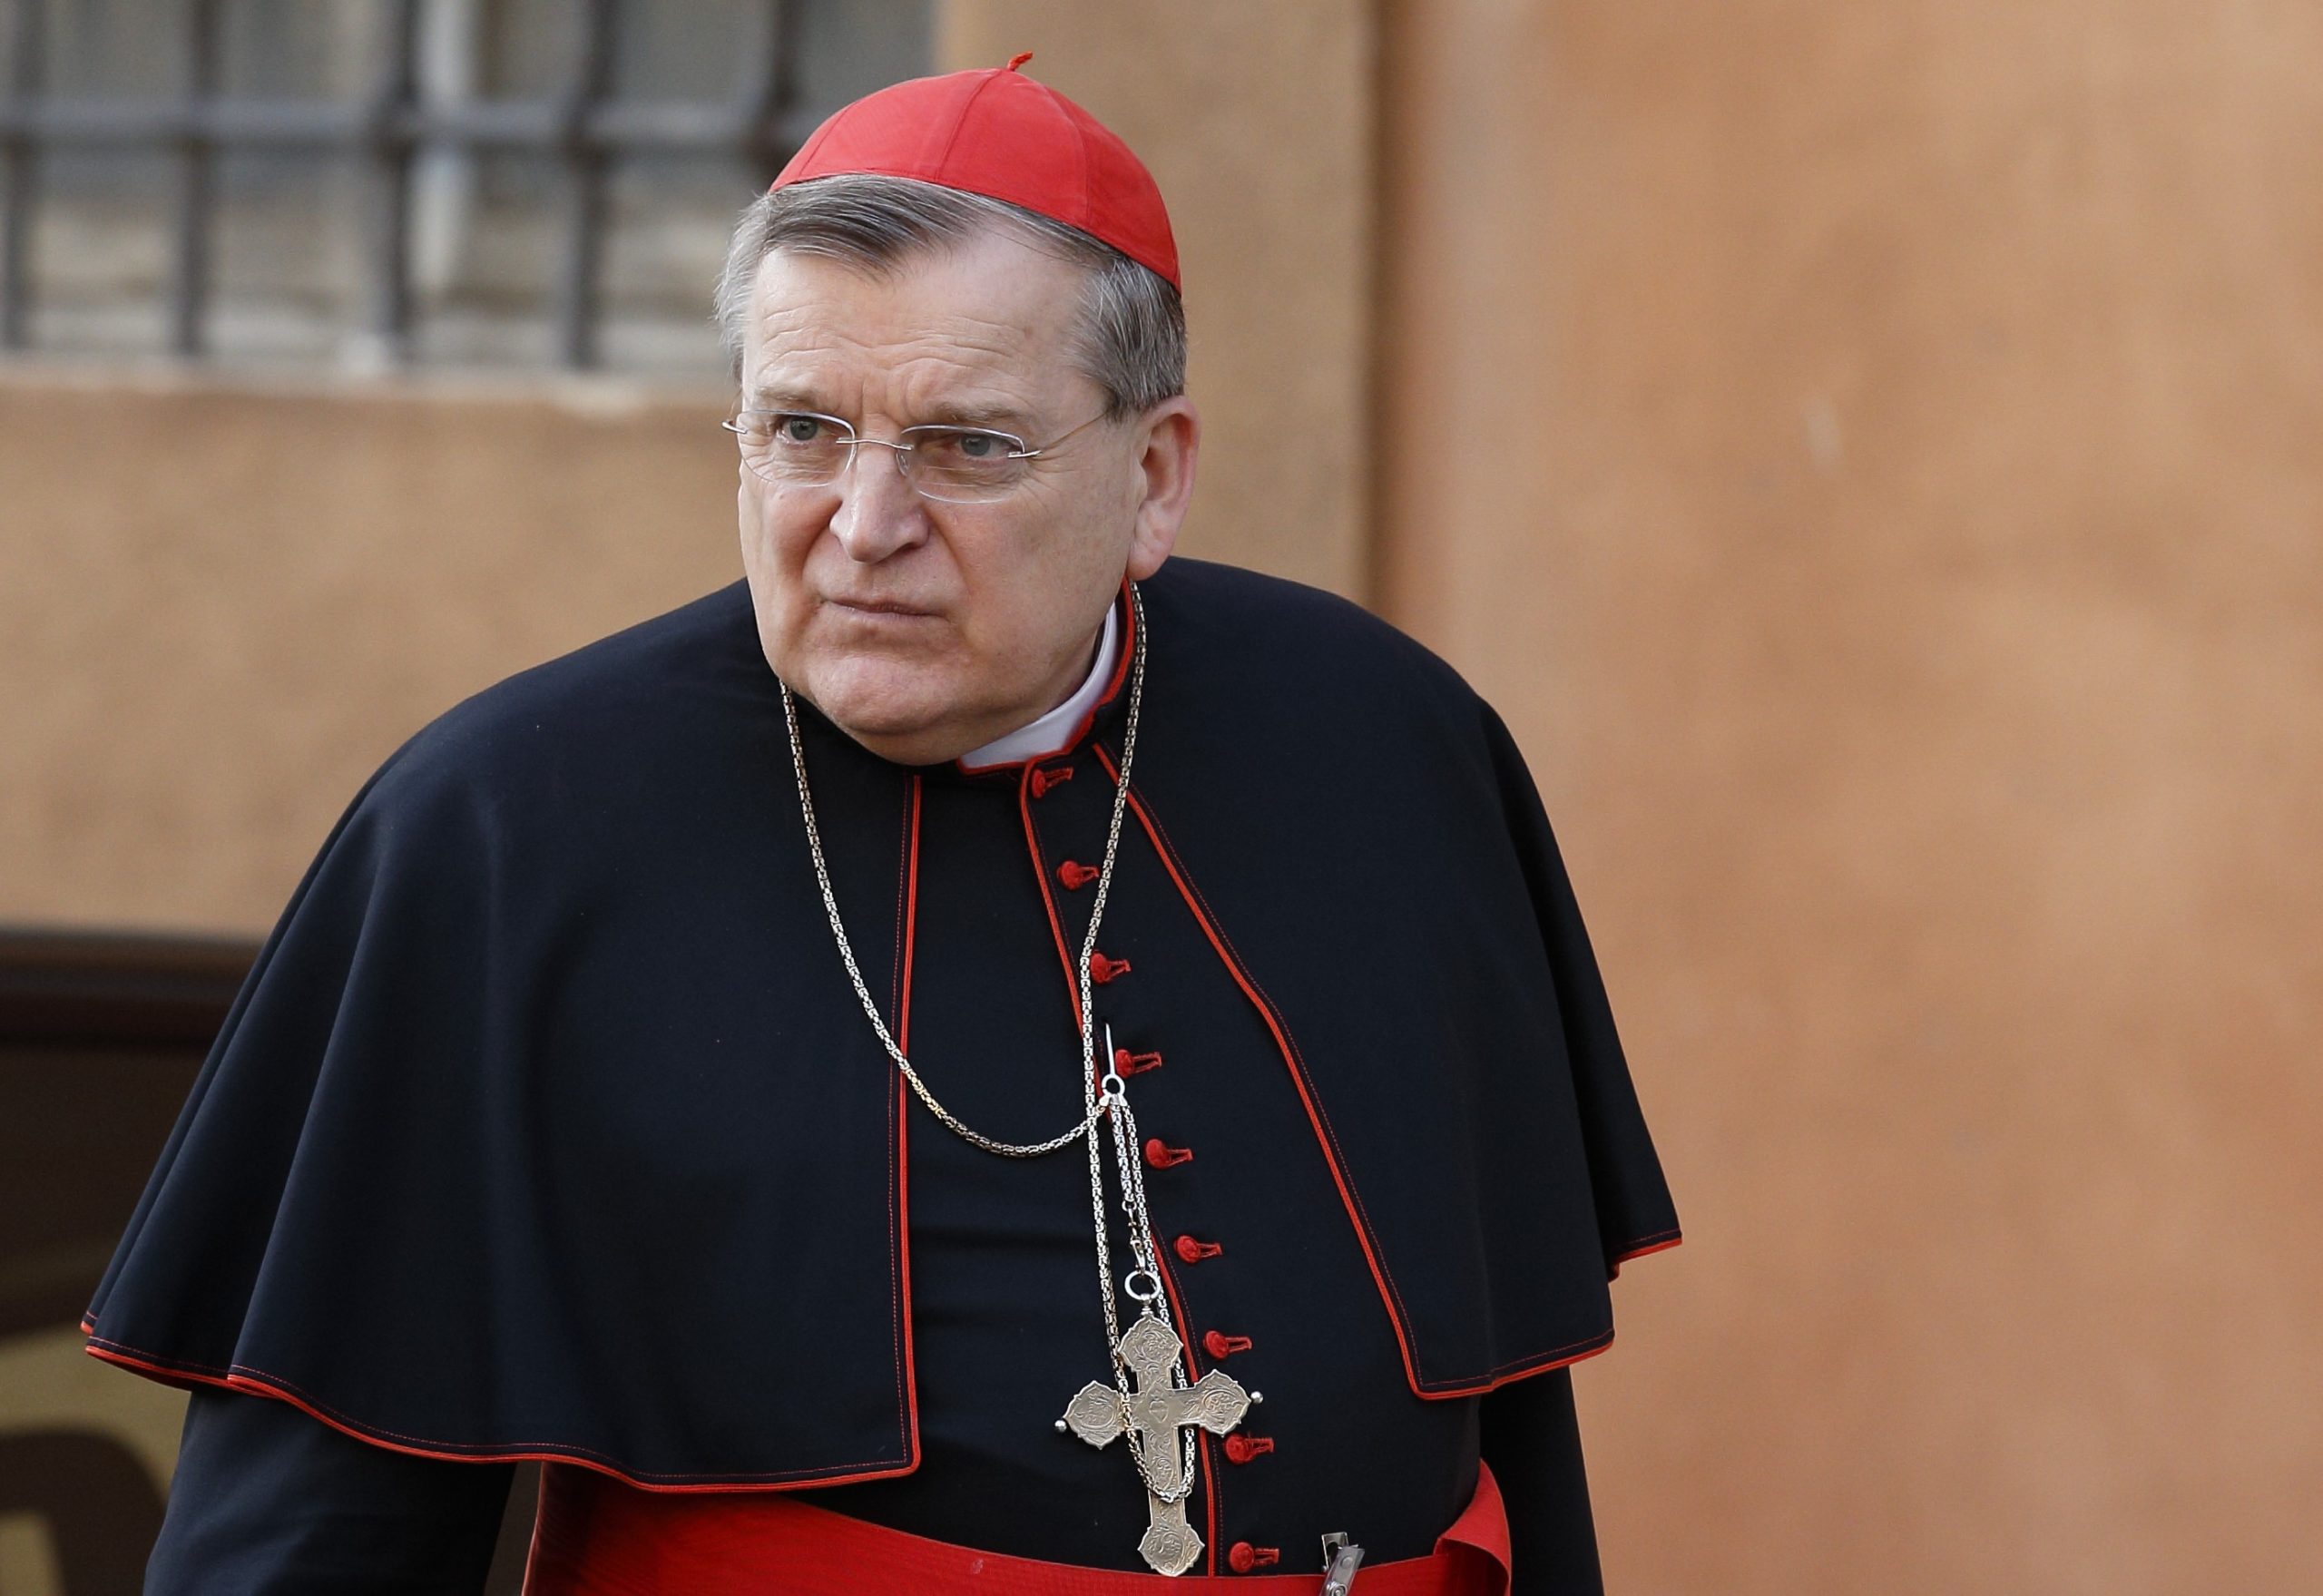 Cardinal Who Claimed Vaccines Put Microchips In Body Now On Ventilator After COVID-19 Diagnosis